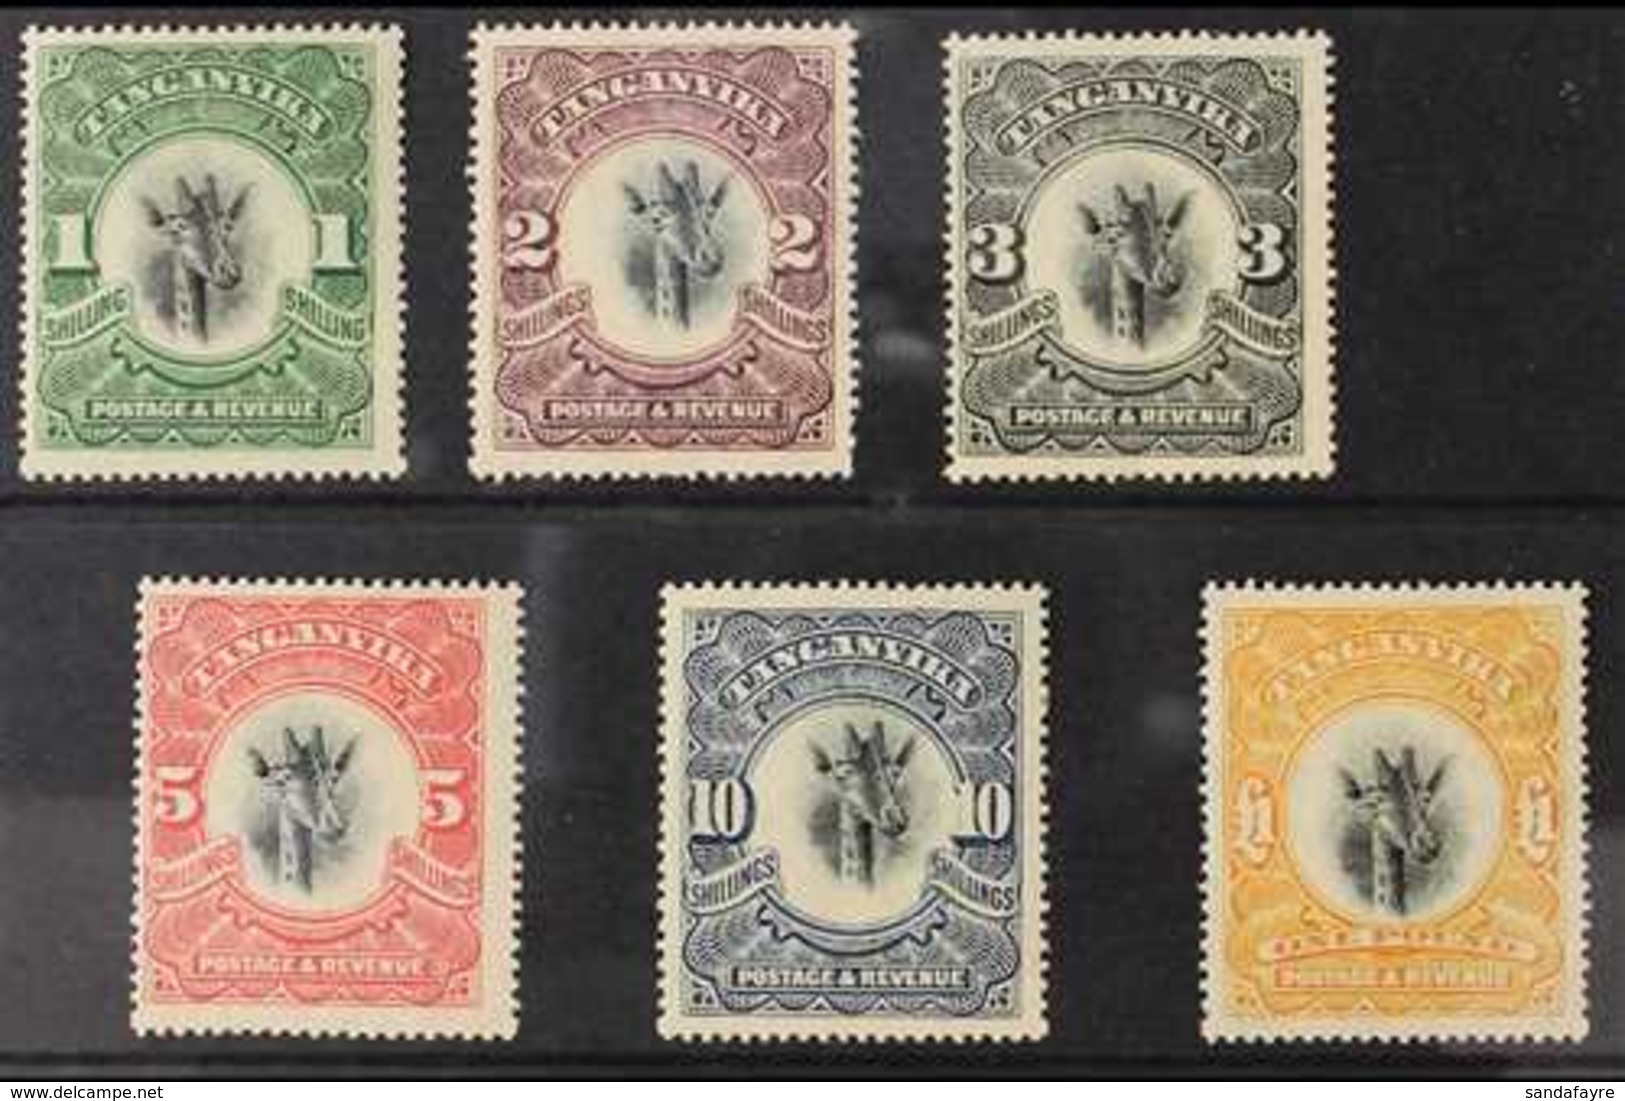 1922  1s To £1 Giraffe High Values, SG 83/8, Very Fine Mint (10s And £1 Particularly Well Centered For This Issue). (6 S - Tanganyika (...-1932)